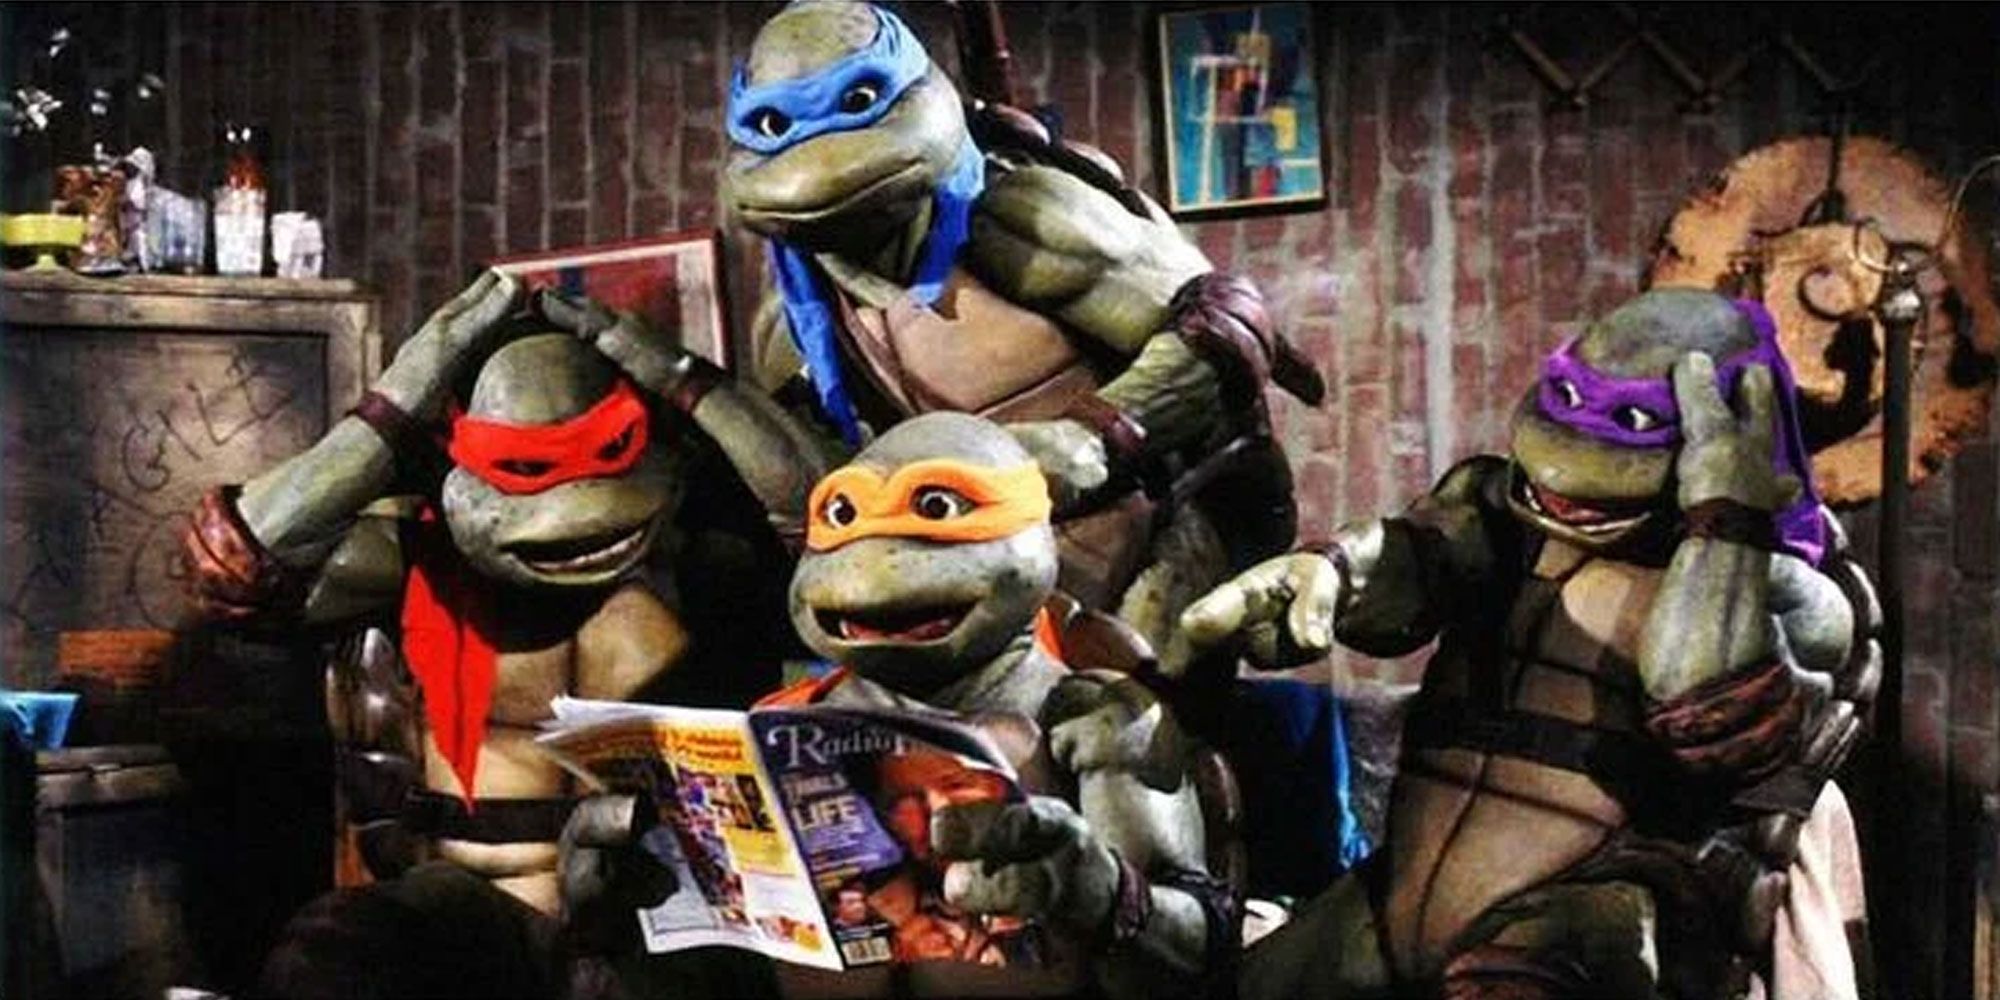 The 90s live action Teenage Mutant Ninja Turtles sit together and look at a magazine